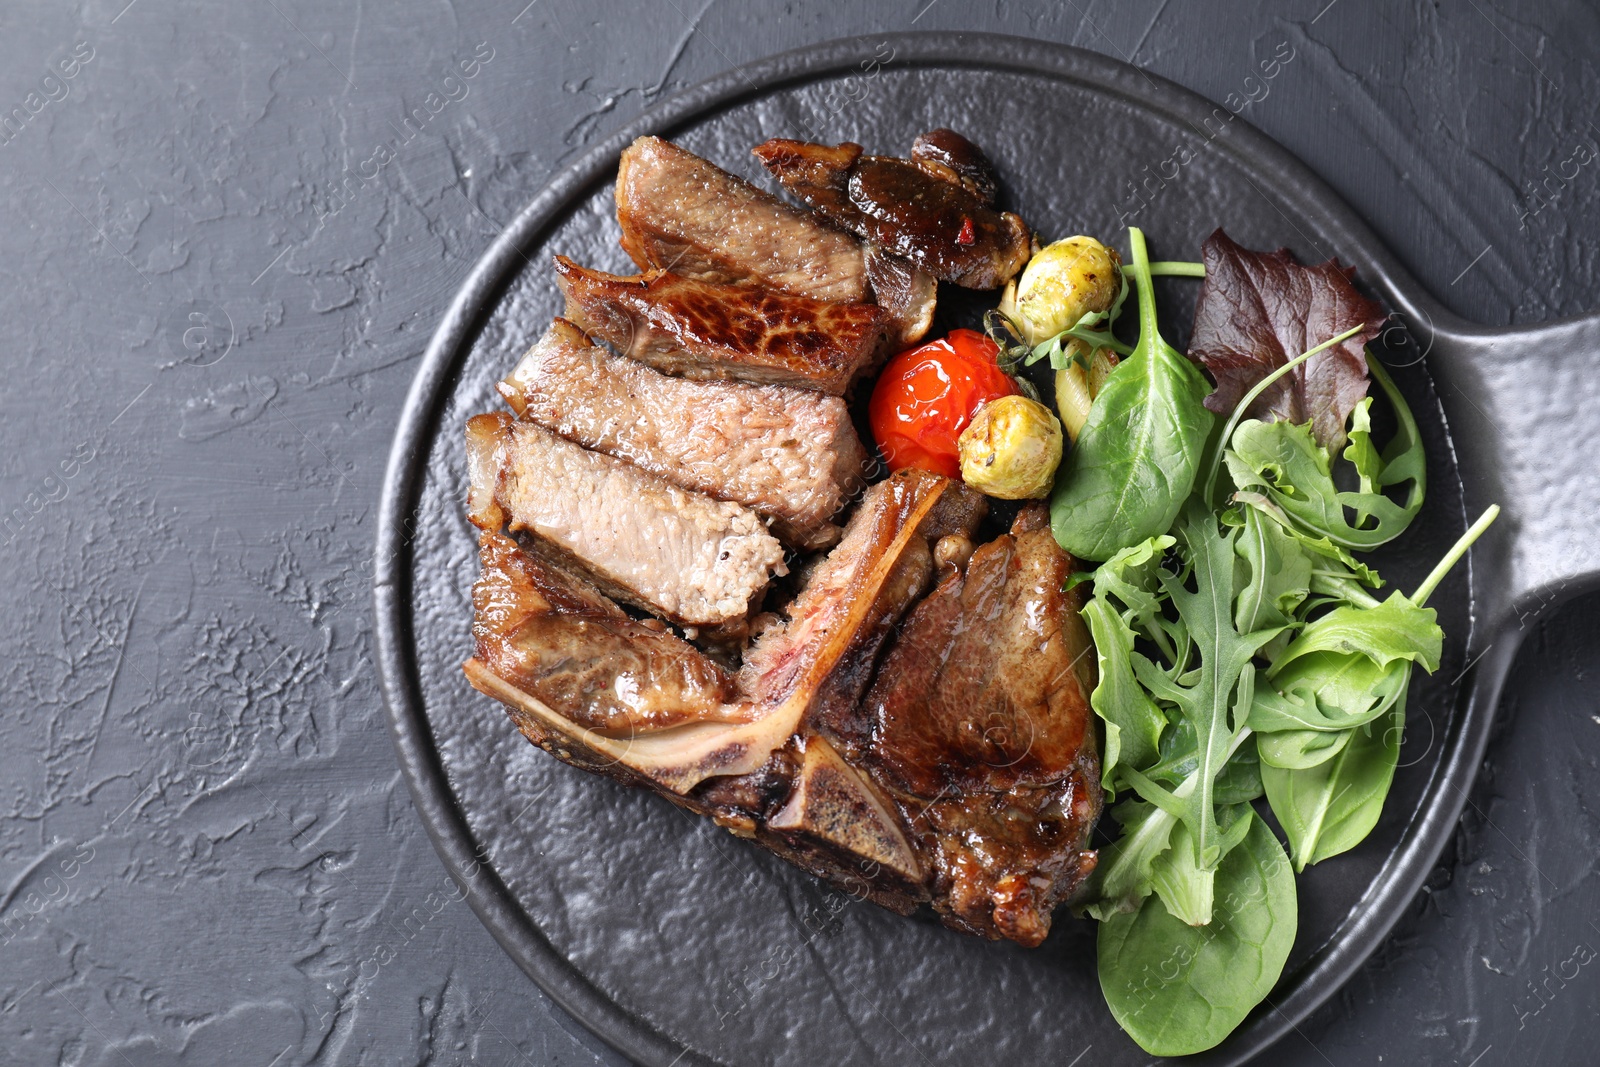 Photo of Delicious grilled beef meat, vegetables and greens on black table, top view